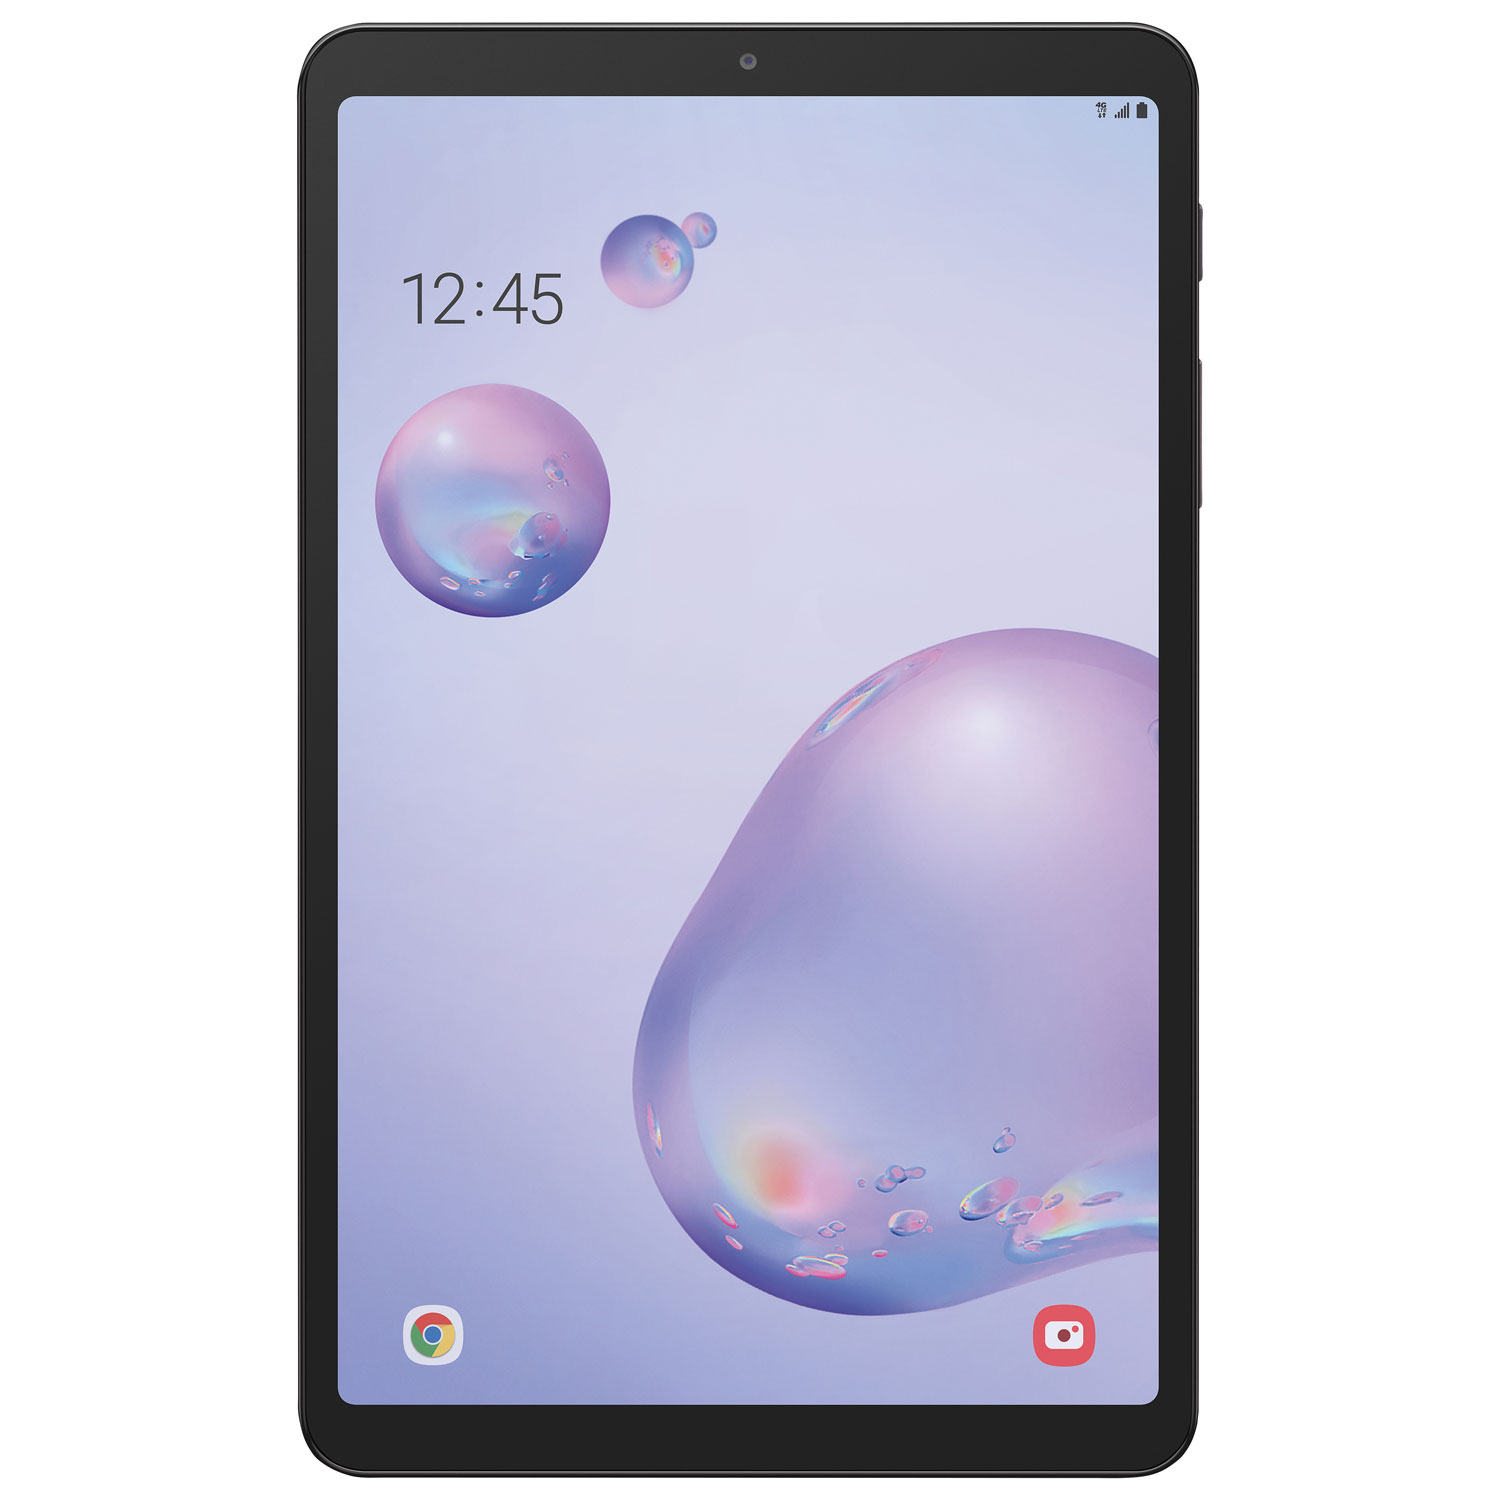 Samsung Galaxy Tab A 8.4" 32GB Android 10.0 LTE Tablet with Exynos 7904 8-Core Processor - Mocha